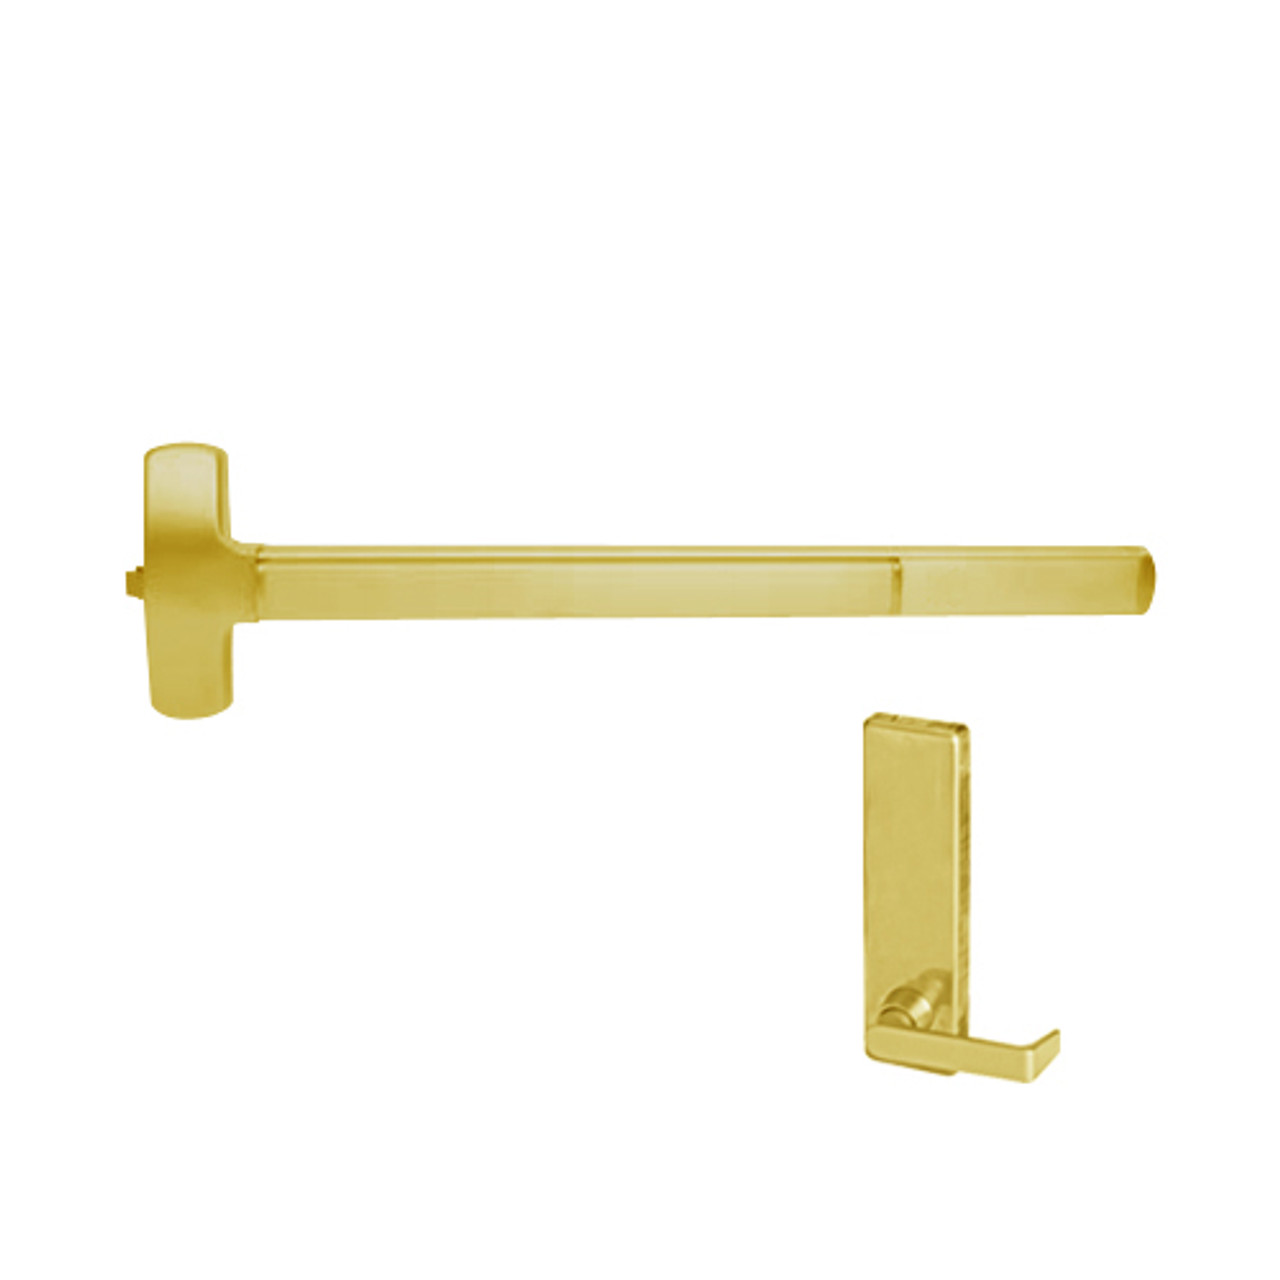 F-25-R-L-BE-DANE-US4-4-LHR Falcon Exit Device in Satin Brass